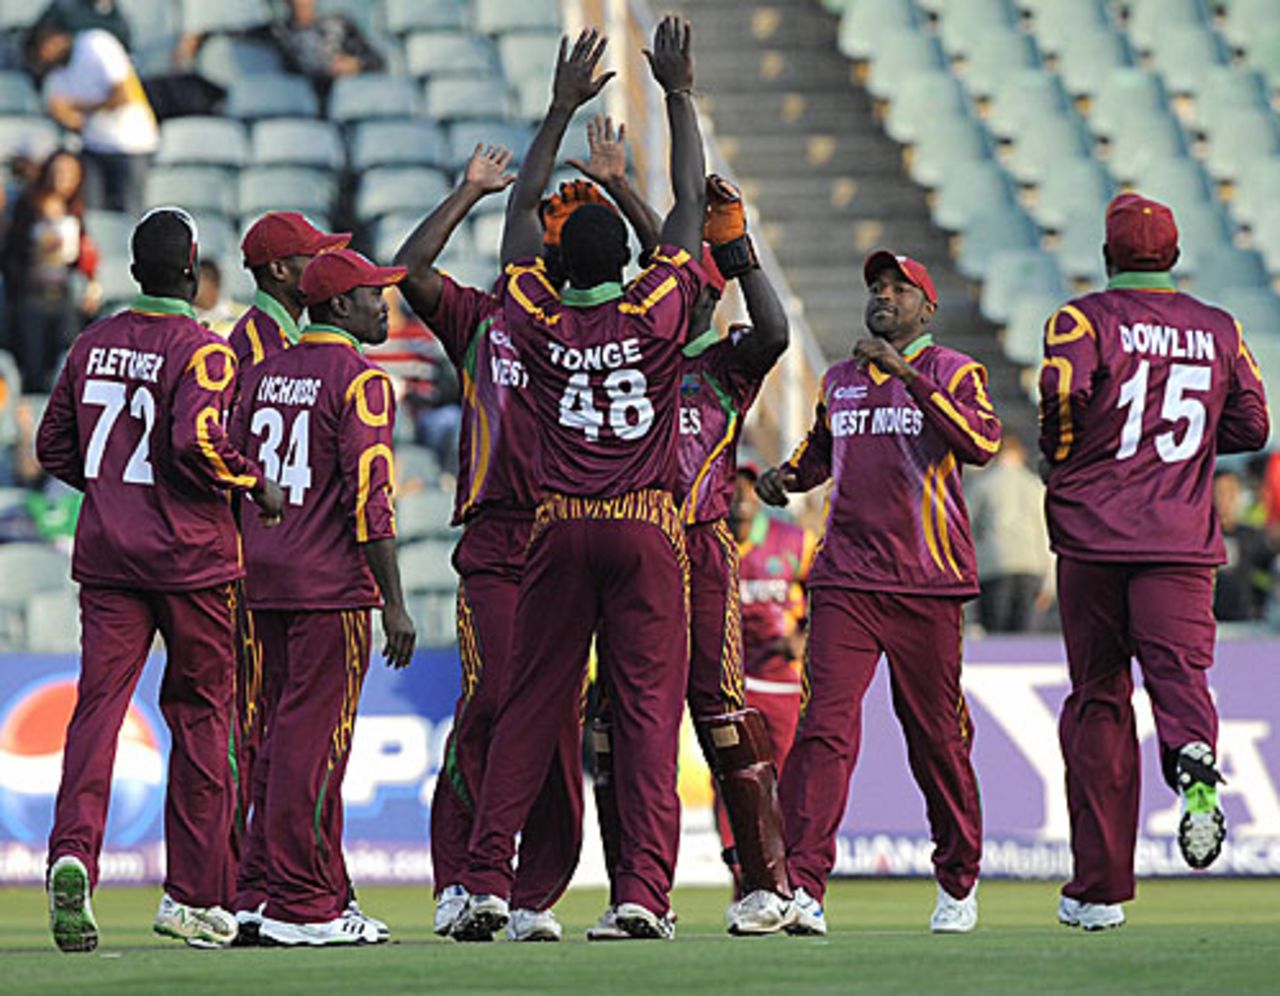 Gavin Tonge and the rest celebrate an early strike, Pakistan v West Indies, Champions Trophy, Group A, Johannesburg, September 23, 2009